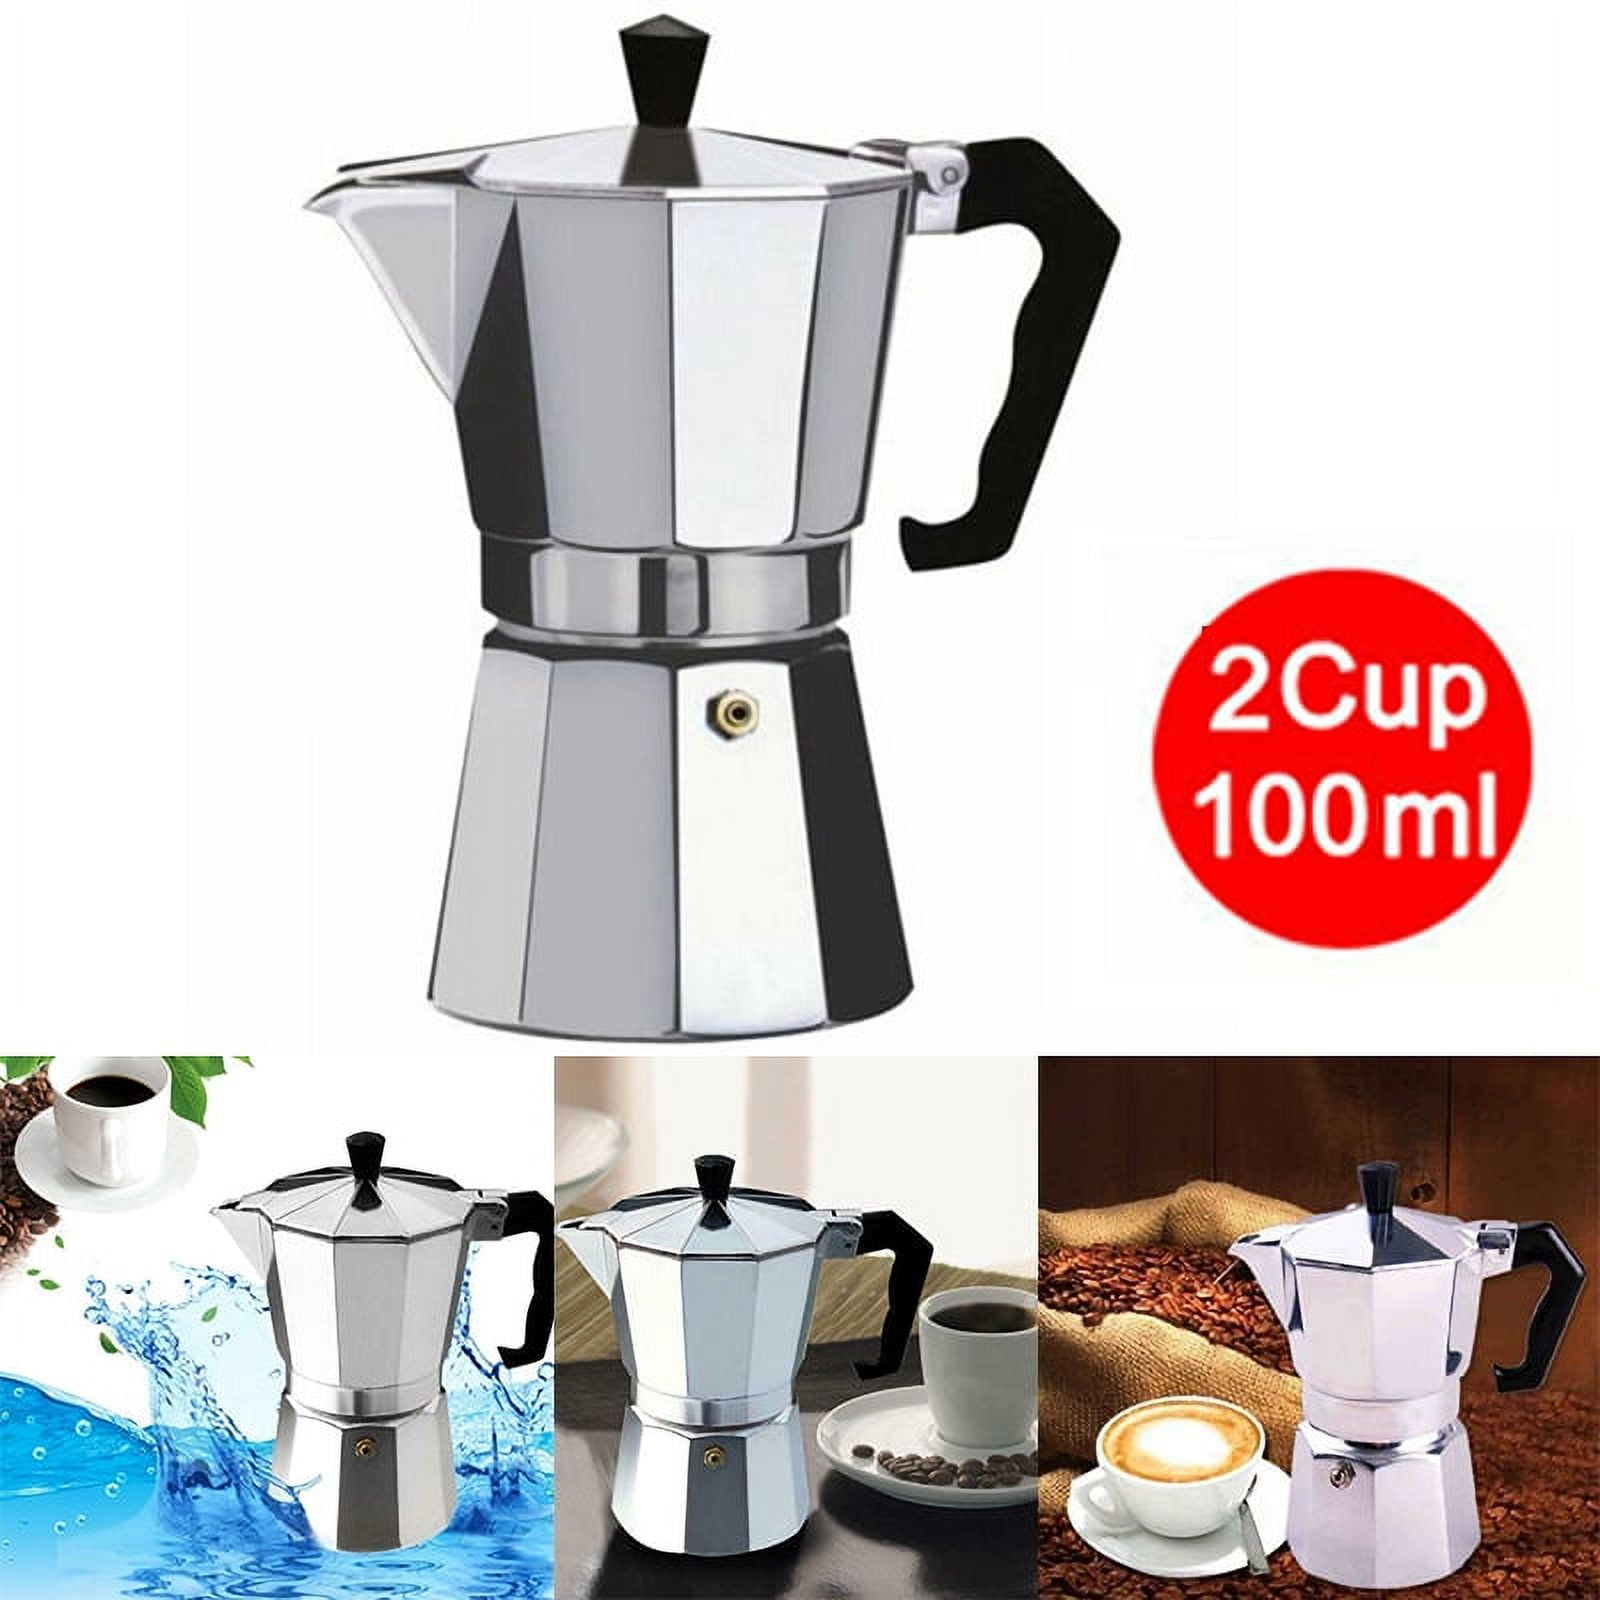 Stovetop Coffee Maker - Two Chimps Coffee